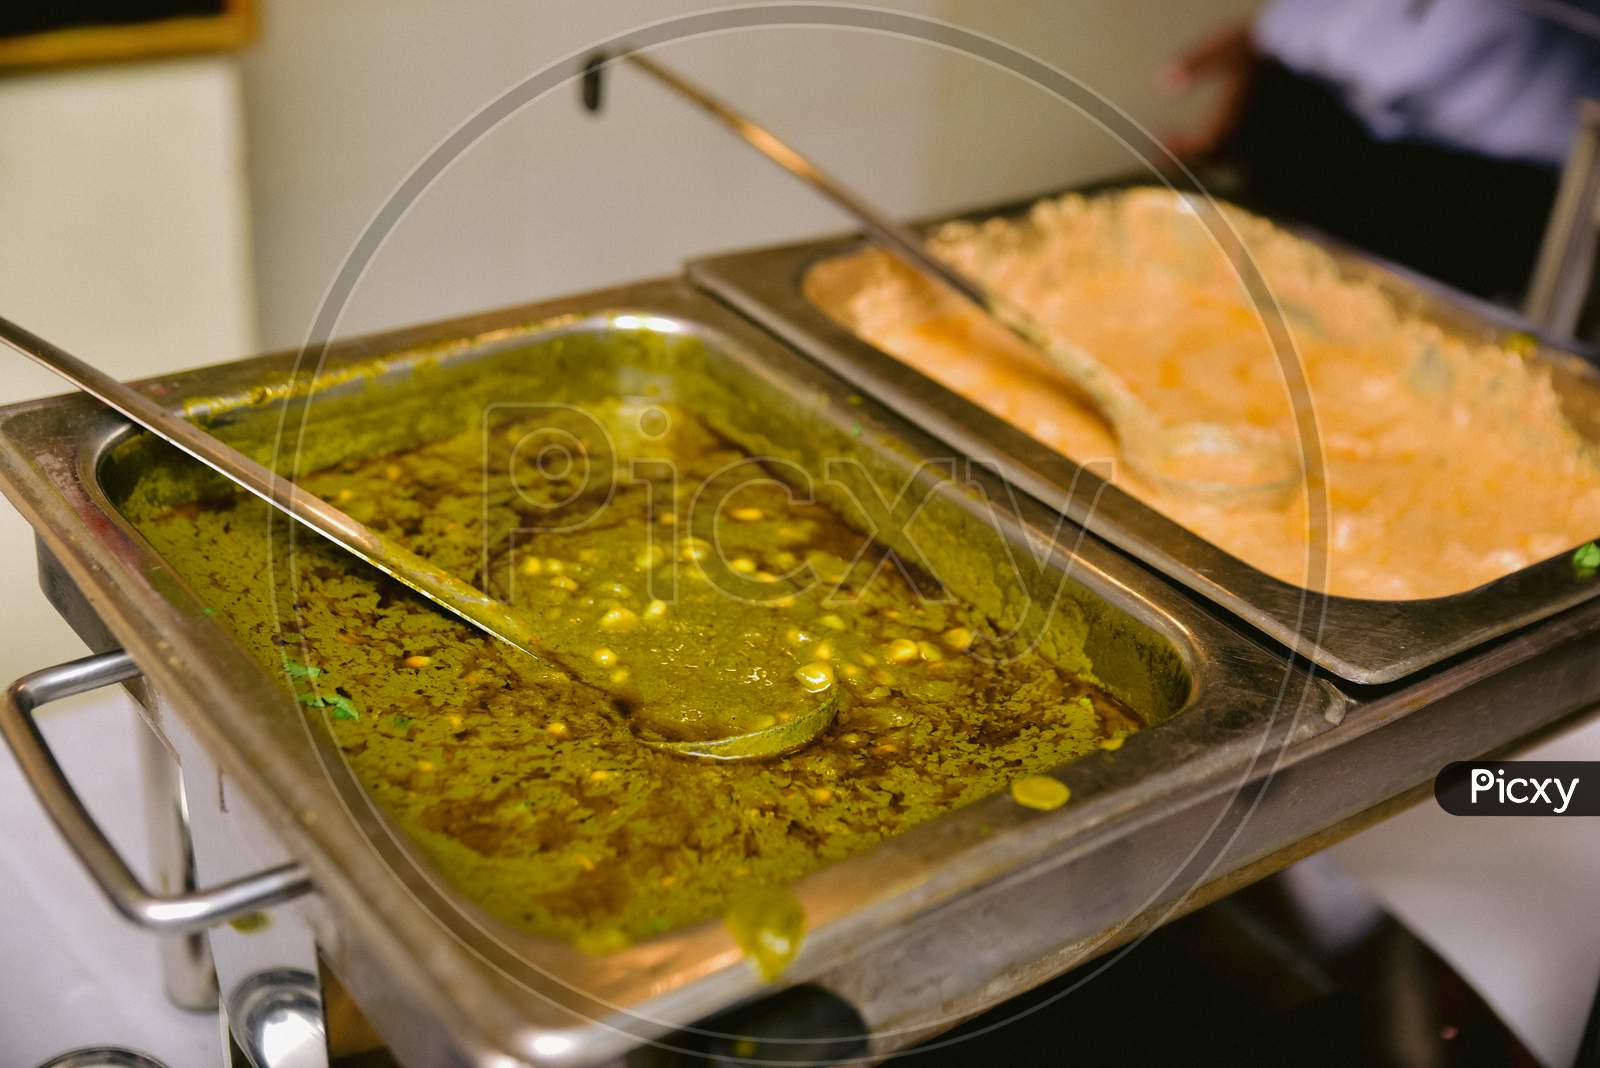 Palak corn served in Indian wedding